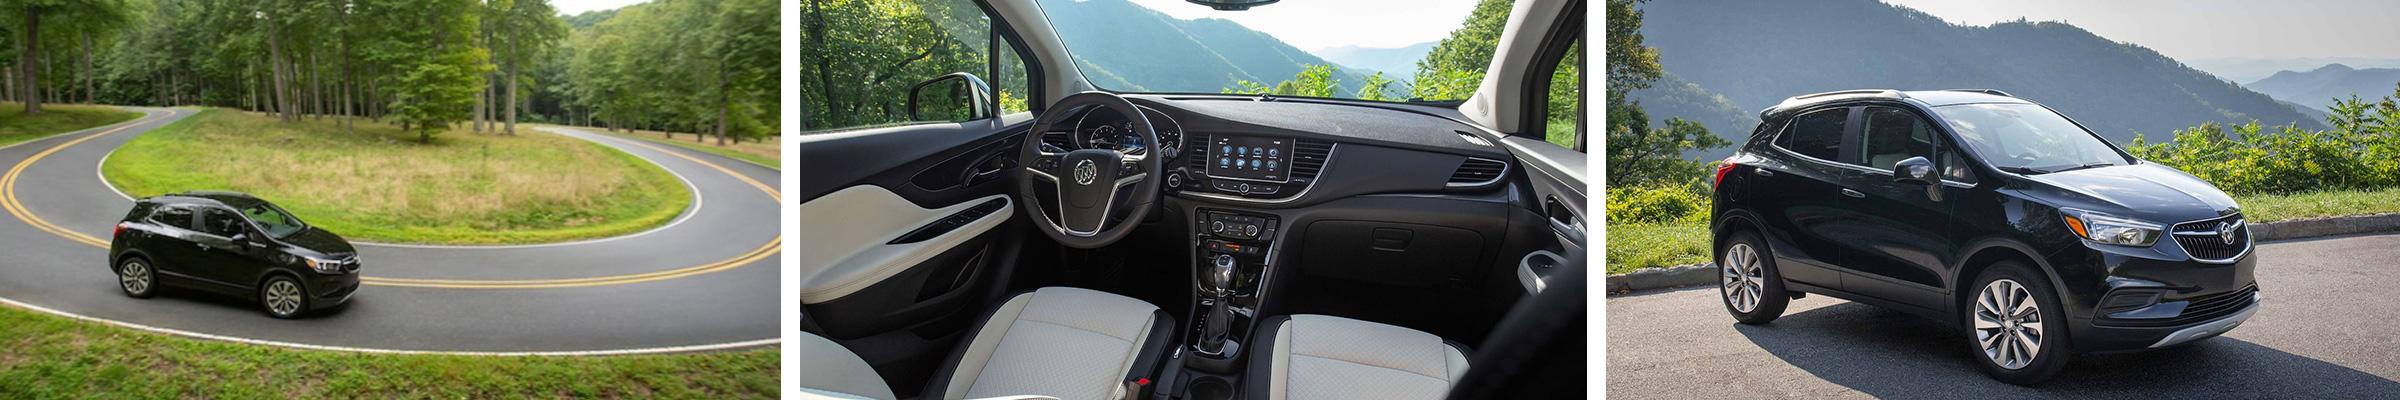 2021 Buick Encore For Sale in Leominster, MA